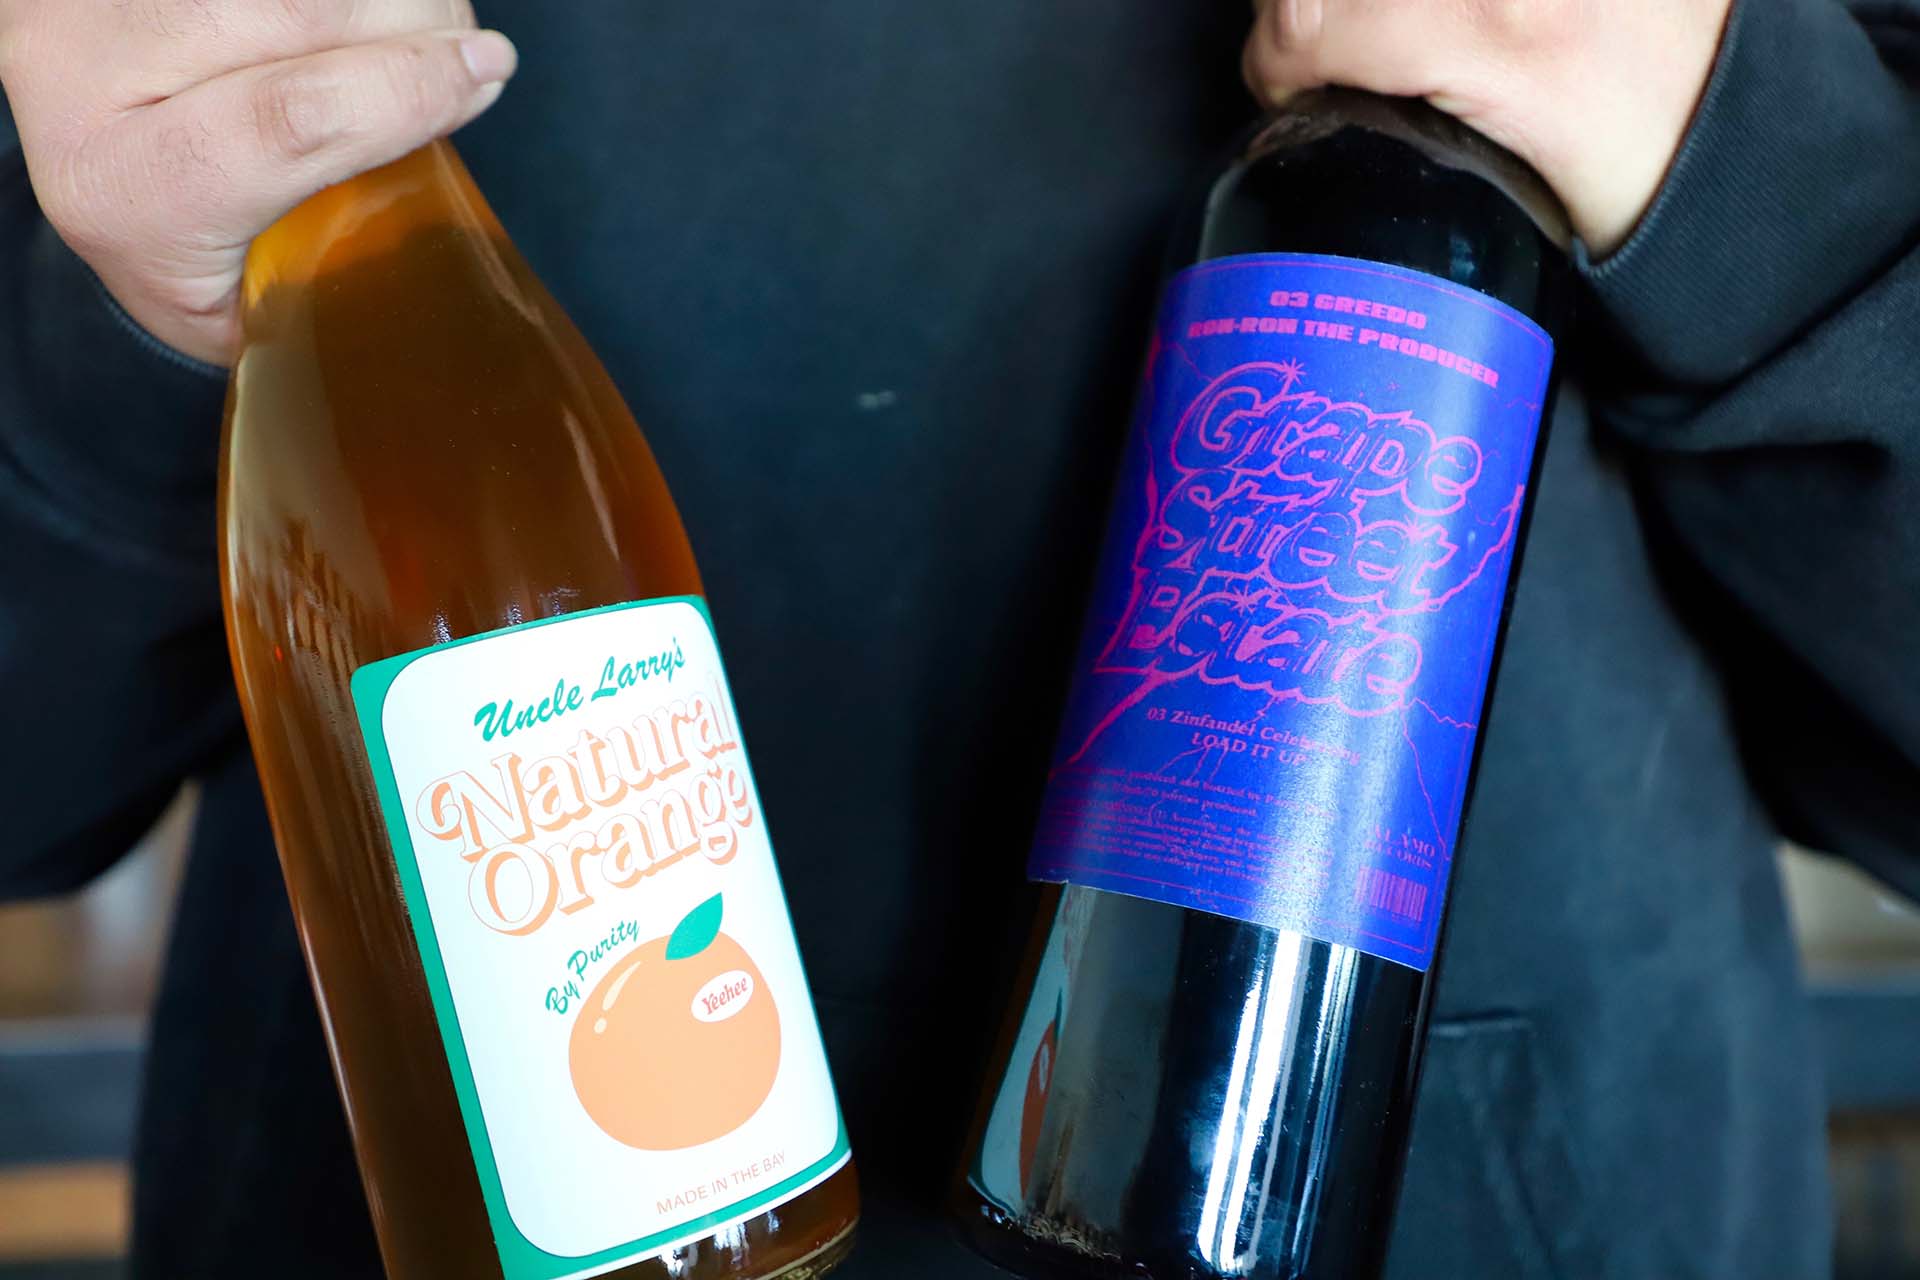 Close-up of two wine bottles; the white and orange label on the left reads "Uncle Larry's Natural Orange" while the purple label on the right reads "Grape Street Estate."